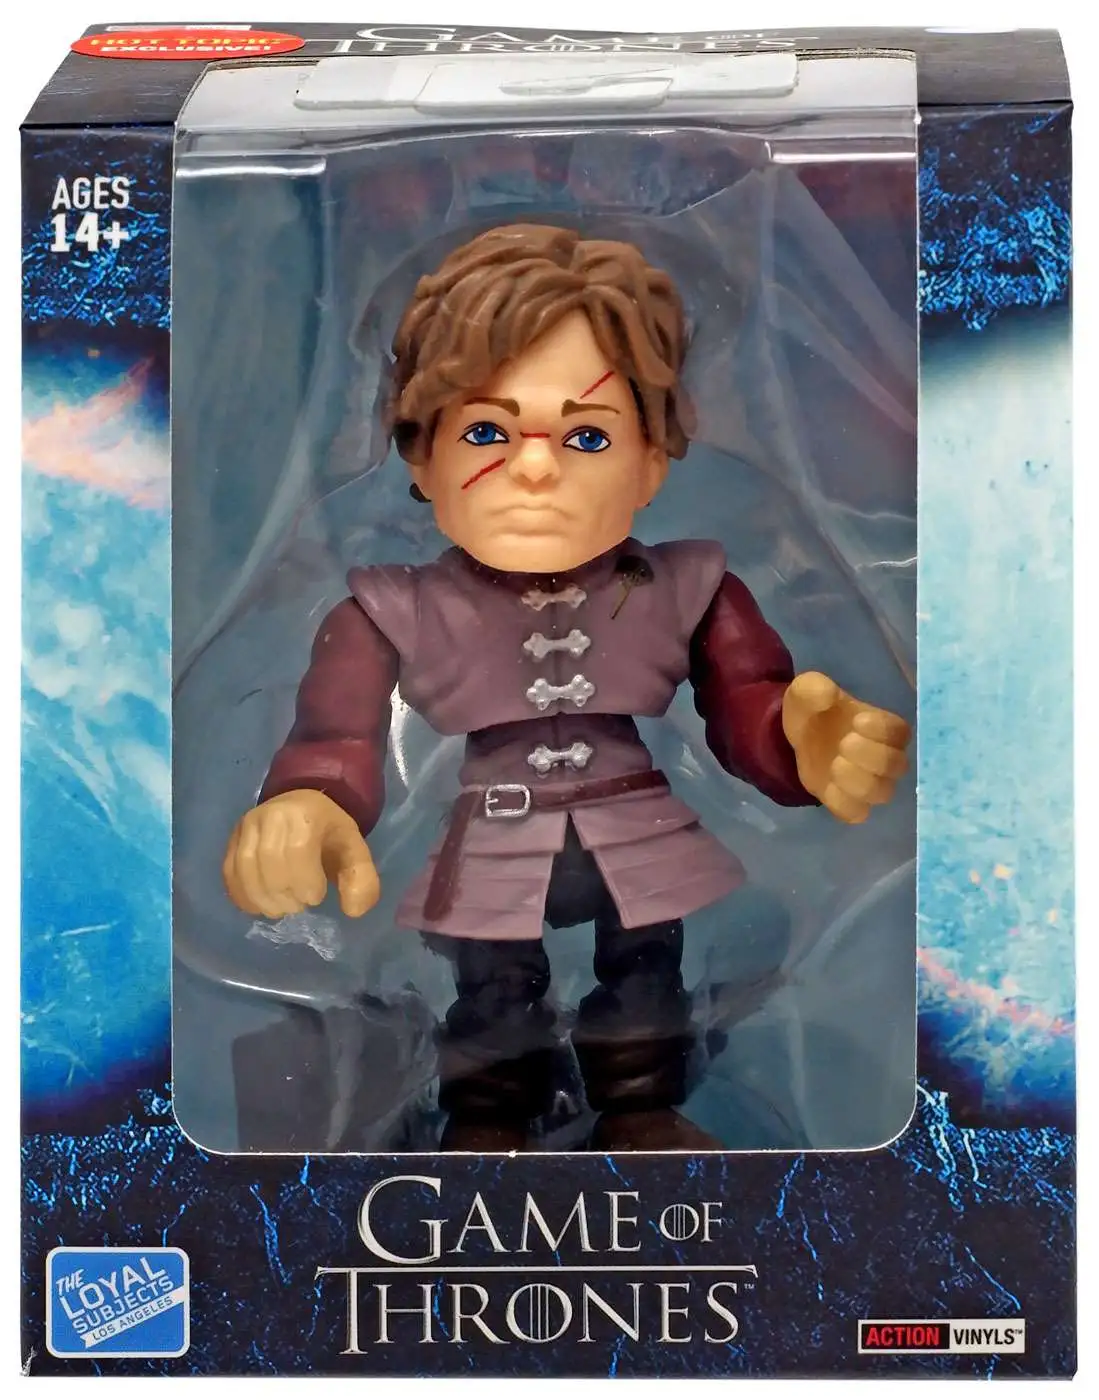 Game of Thrones Loyal Subjects Mini Figure A Jaime Lannister 